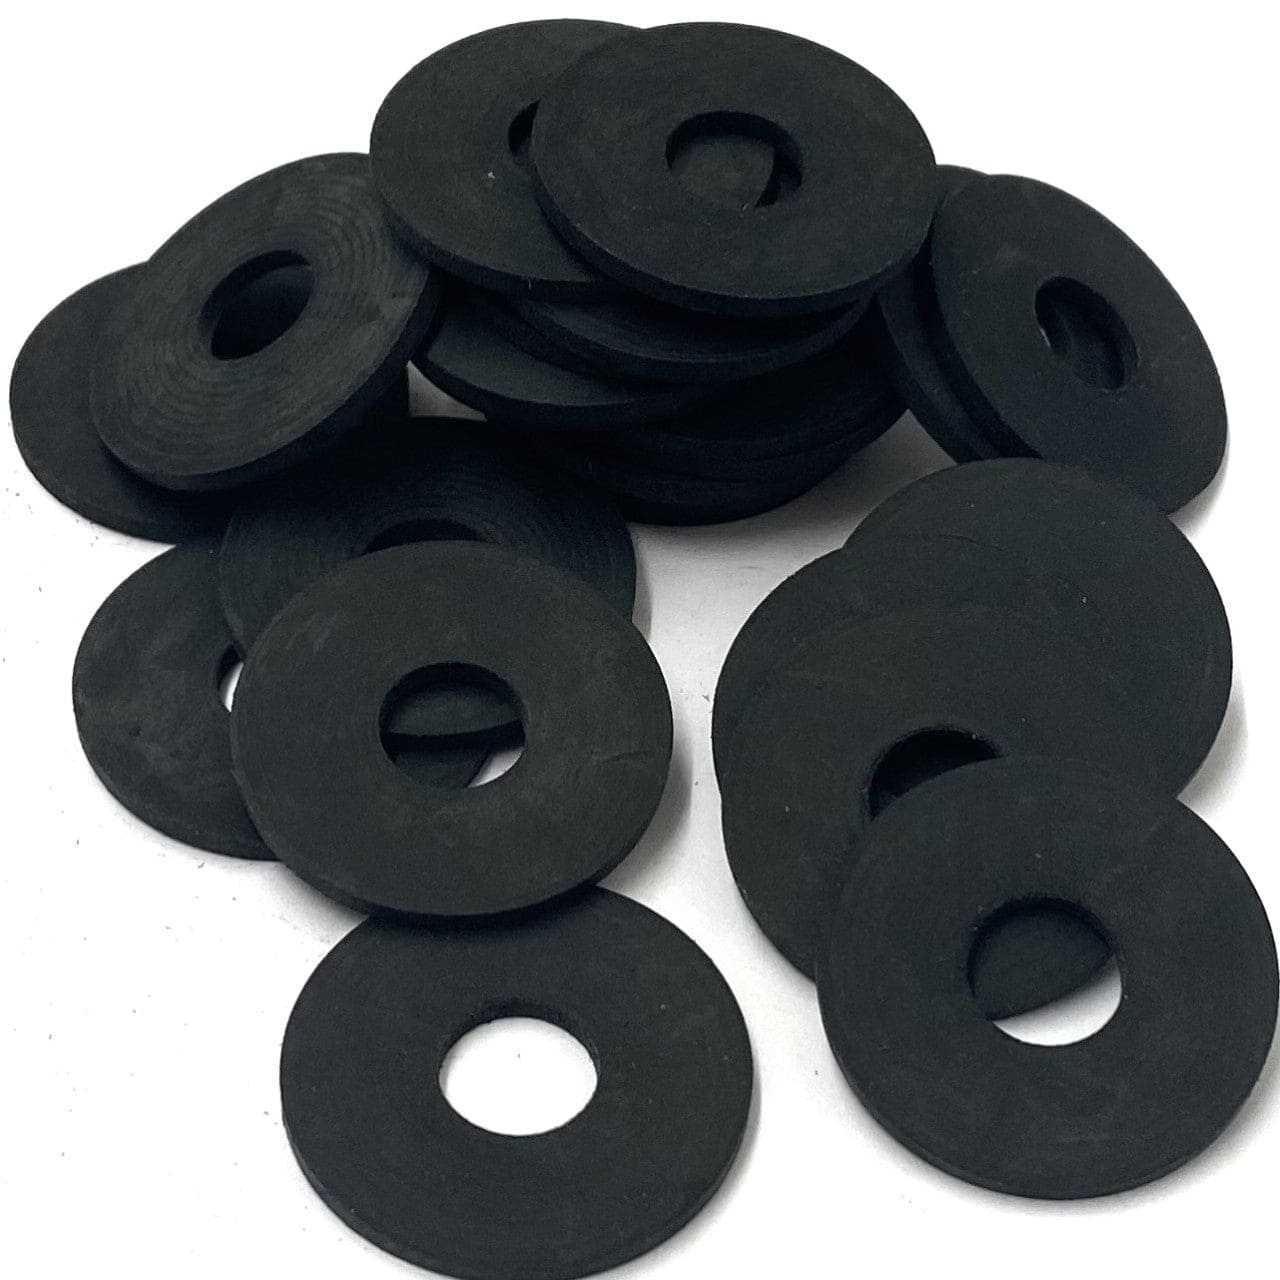 M6 X 12 X 1.5mm Form A Nylon Rubber Washers Black DIN 125-1A